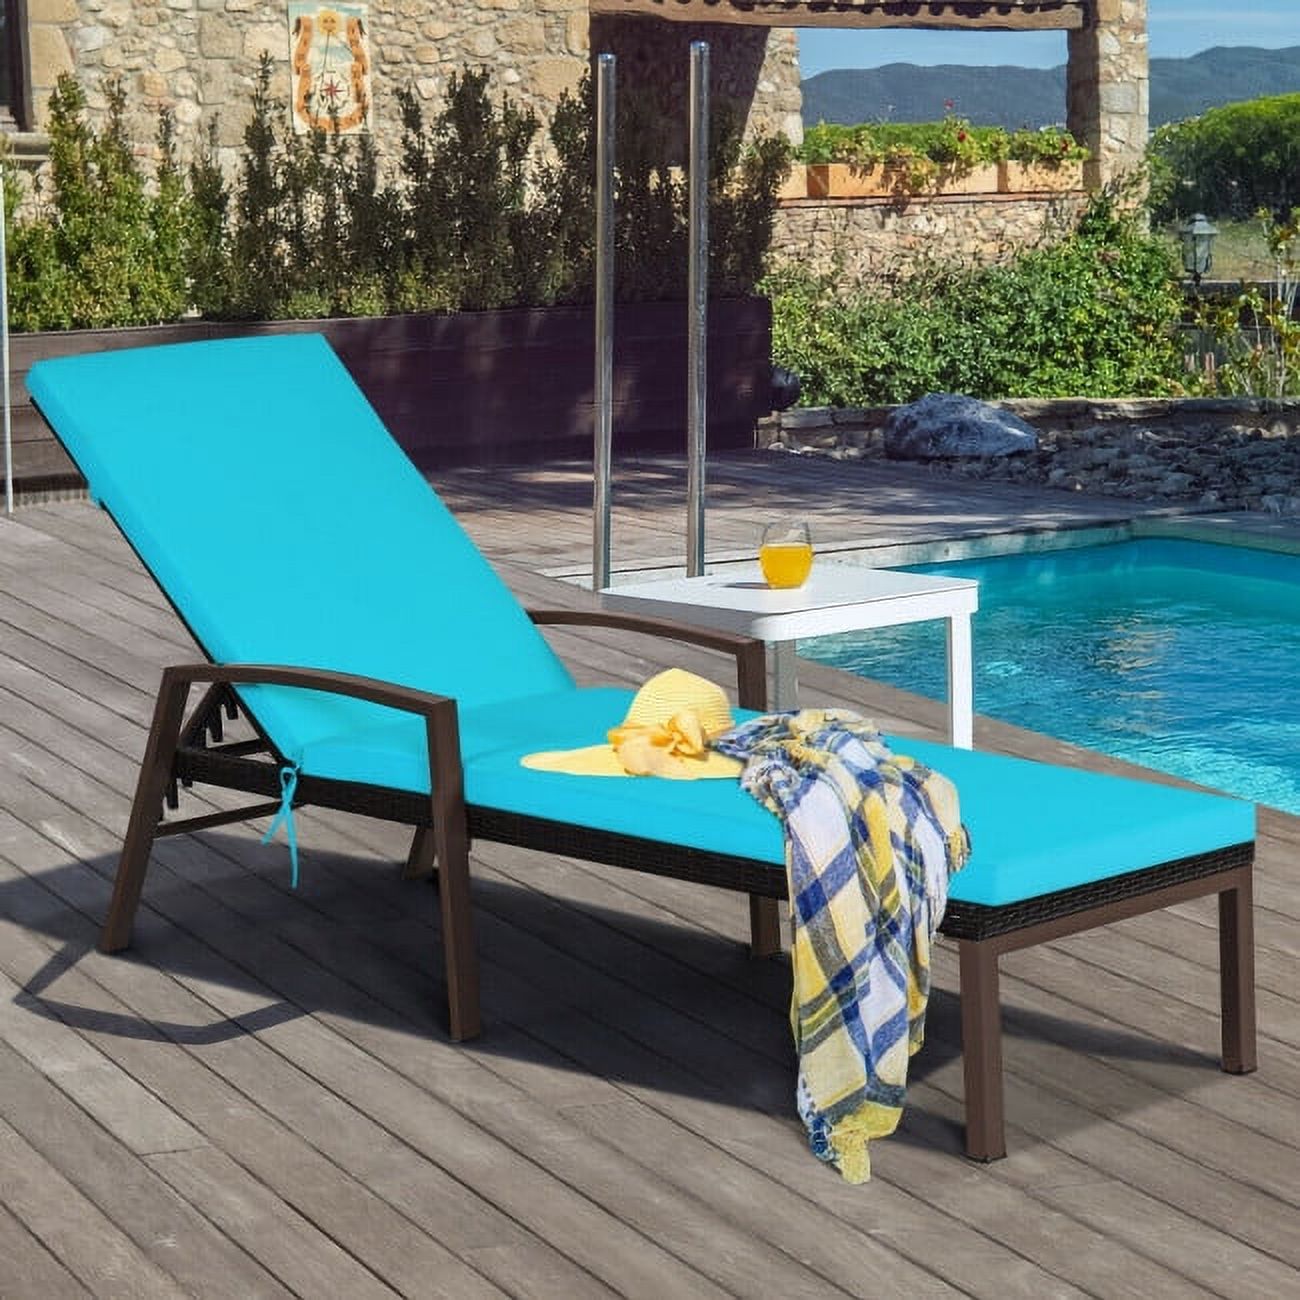 GIVIMO Outdoor Adjustable Reclining Patio Rattan Lounge Chair Turquoise - image 2 of 8